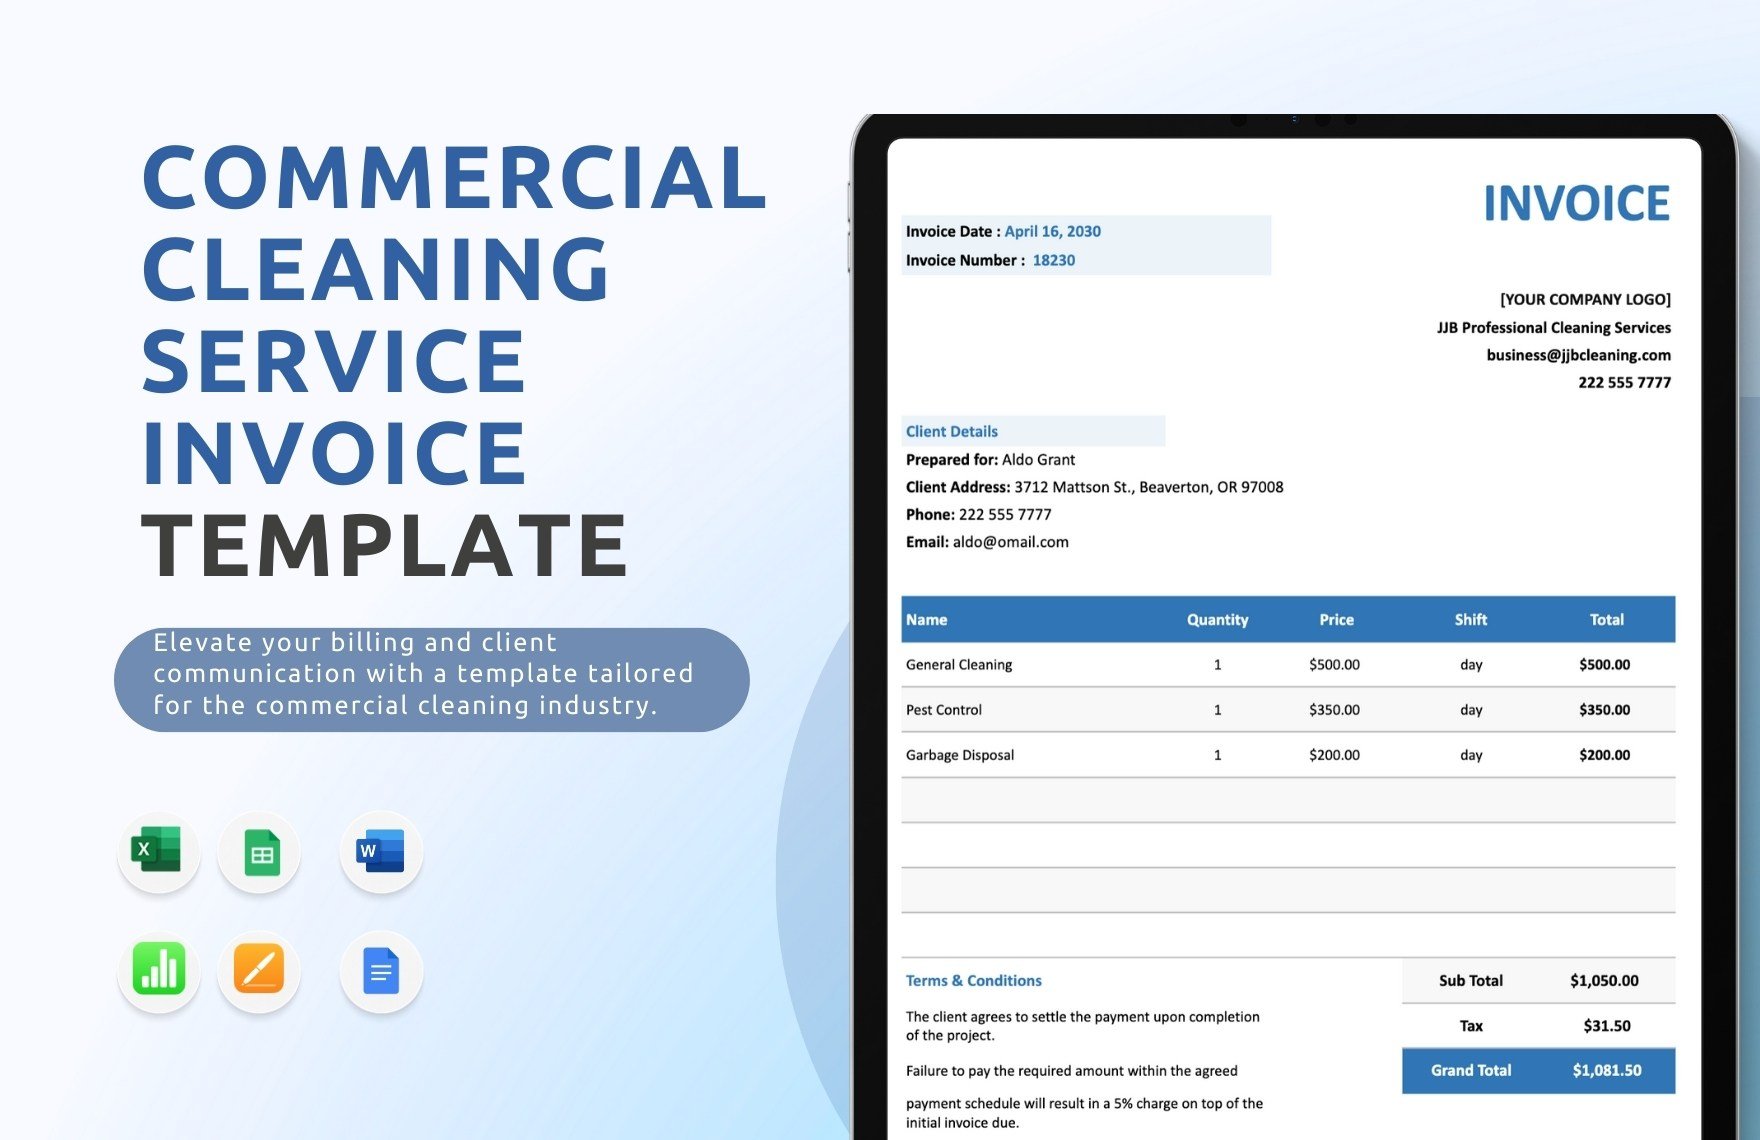 Commercial Cleaning Service Invoice Template in Word, Google Docs, Excel, Google Sheets, Apple Pages, Apple Numbers